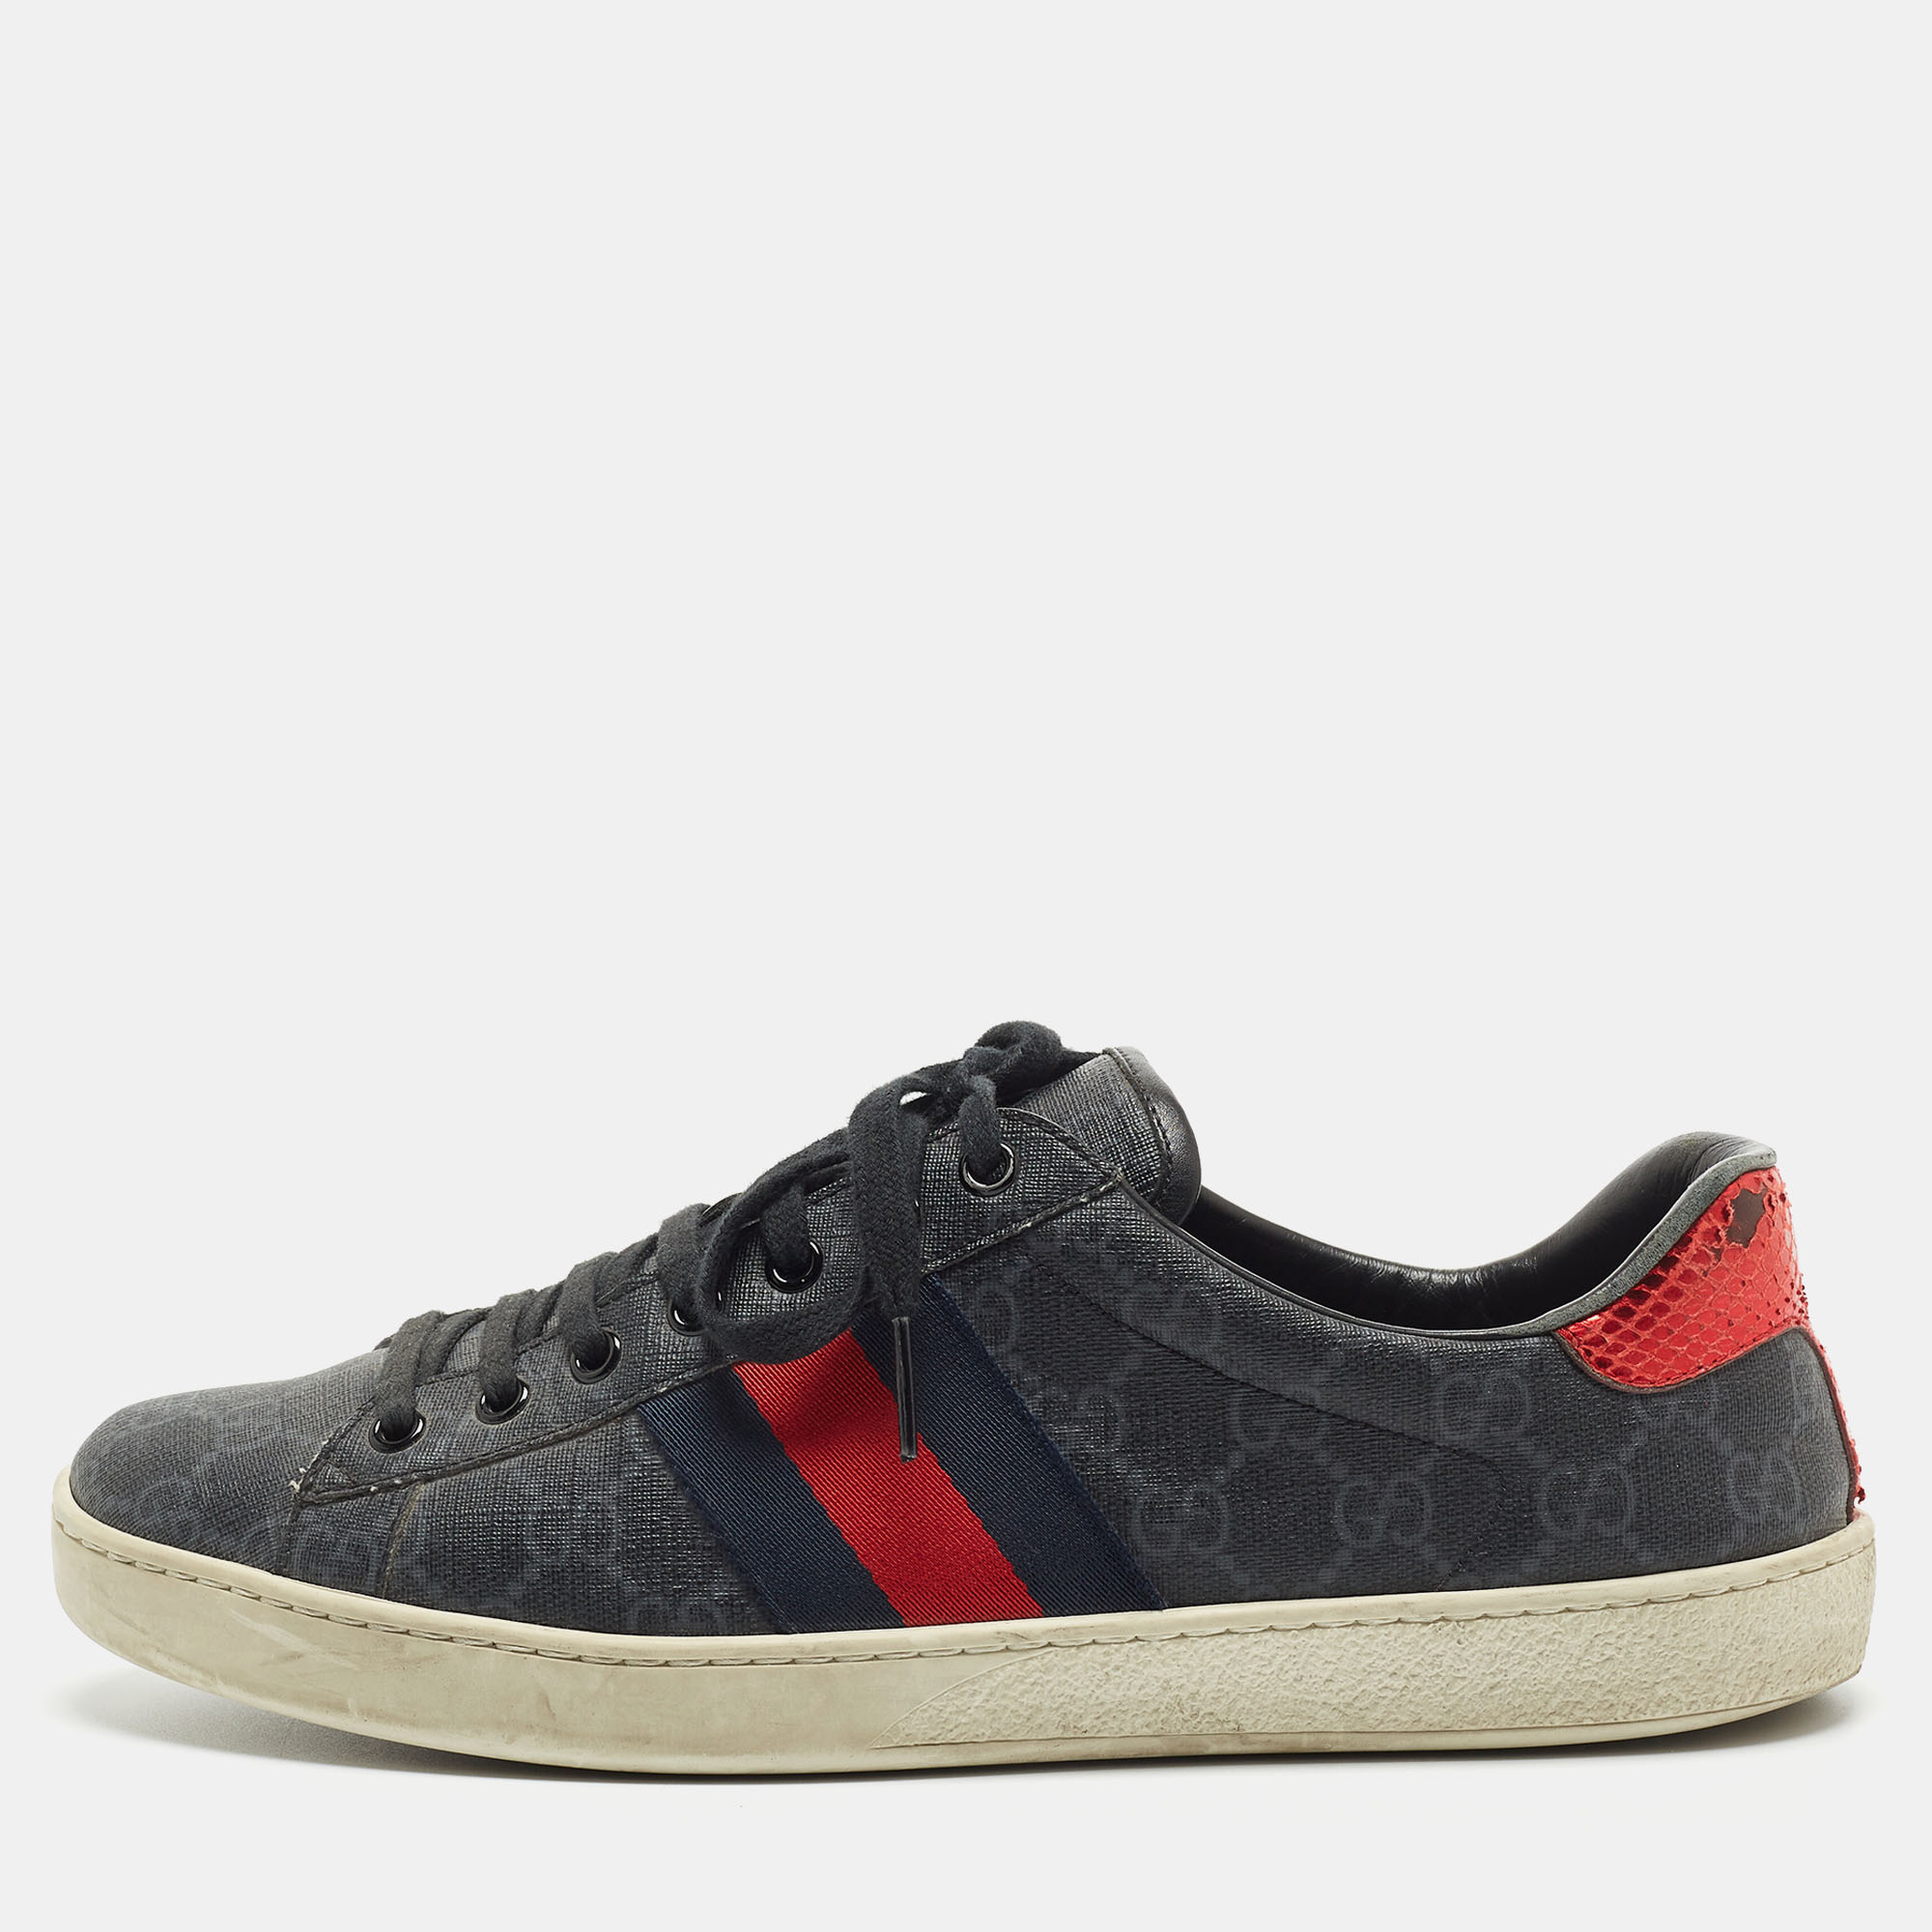 Pre-owned Gucci Black Gg Supreme Canvas Ace Low Top Trainers Size 42